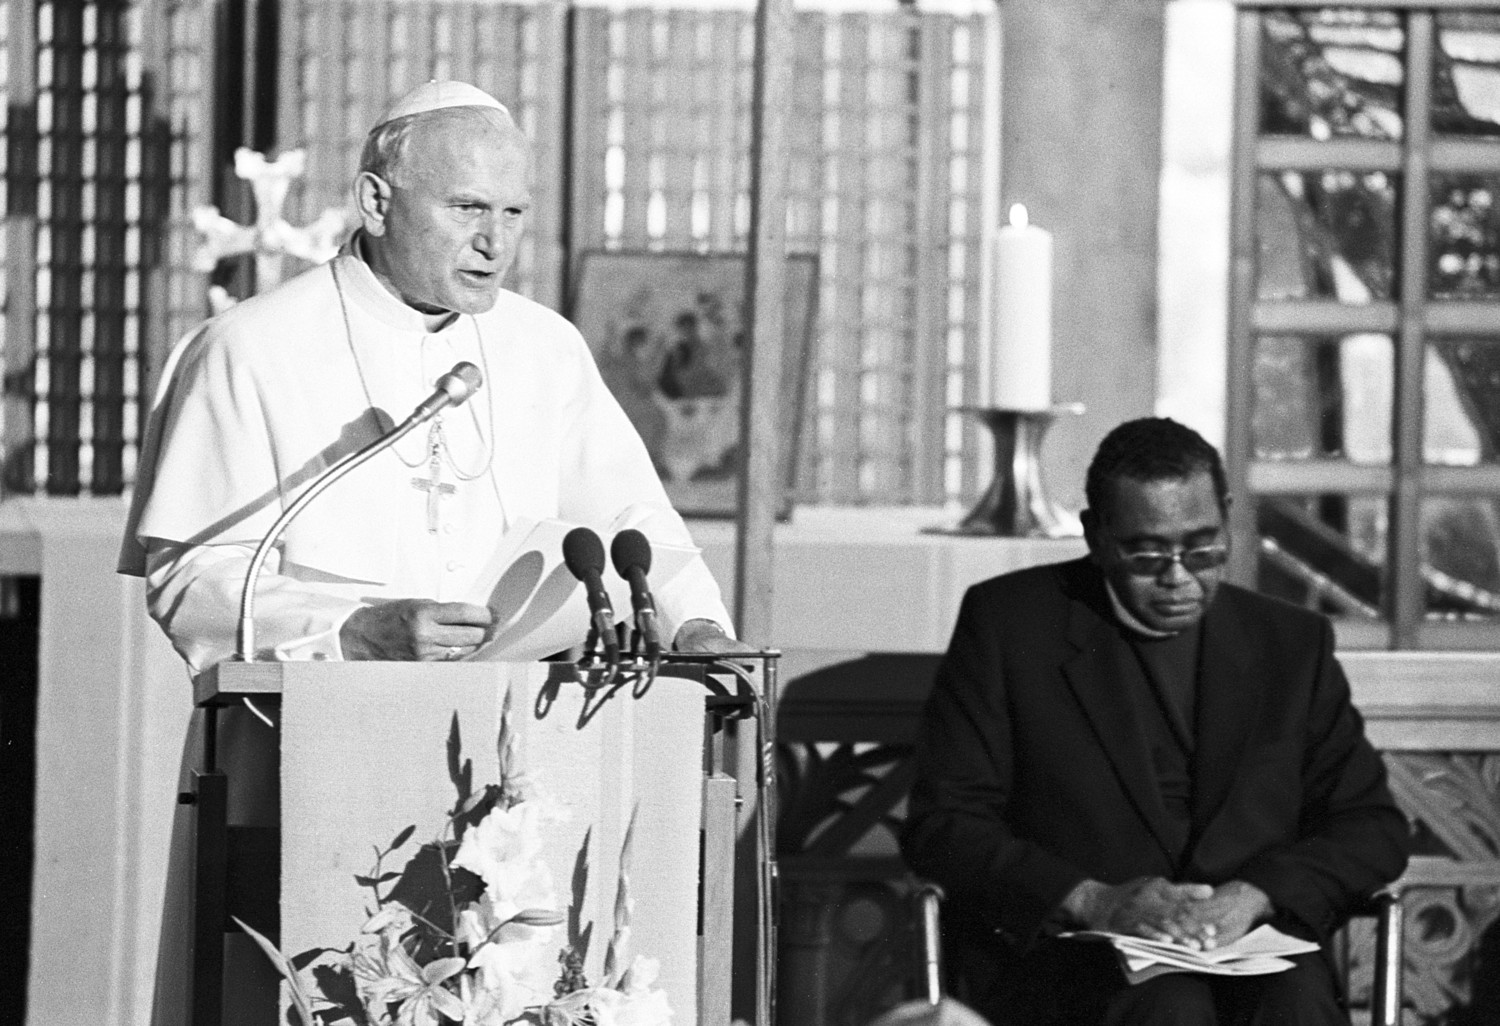 Pope St. John Paul II speaks during a visit to the World Council of Churches in Geneva June 12, 1984. Also pictured is the Rev. Philip Potter, general secretary of the WCC. Pope Francis is scheduled to attend an ecumenical prayer service and meeting at the WCC during a one-day visit to Geneva June 21.